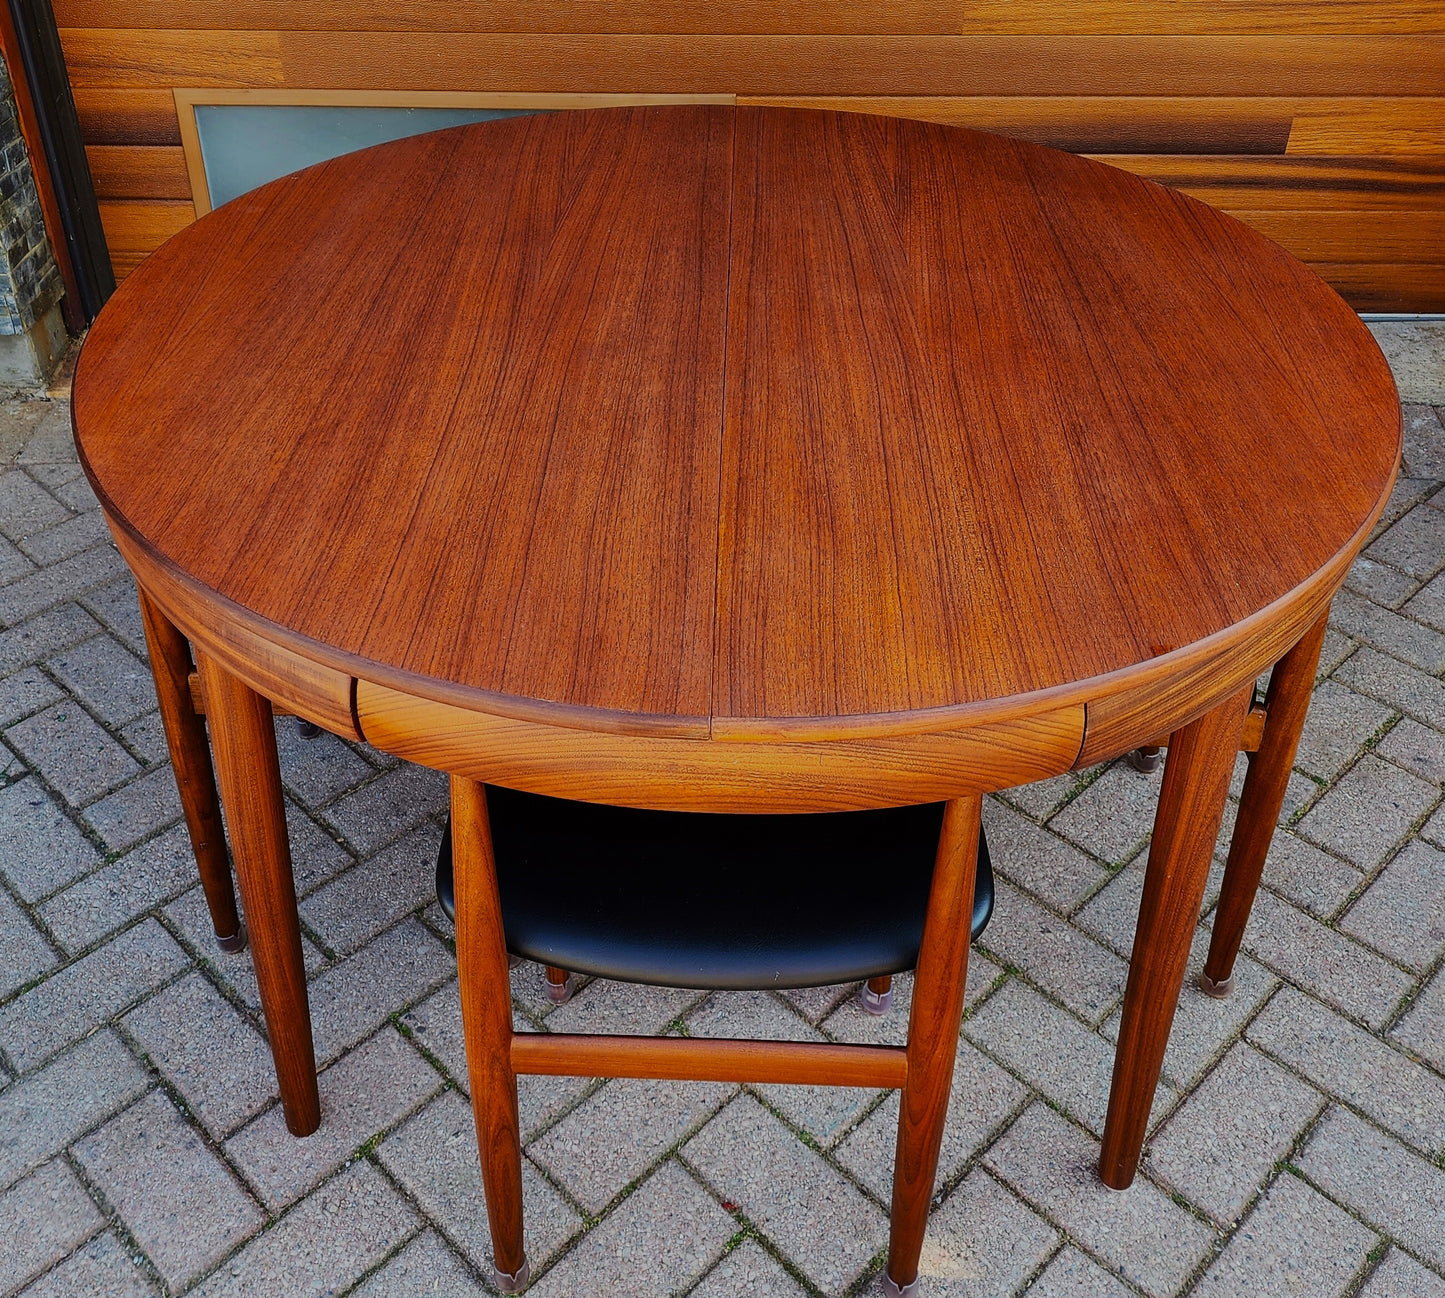 REFINISHED Danish MCM ROUNDETTE Teak Extension Table & 4 Chairs (four-legged) by Hans Olsen